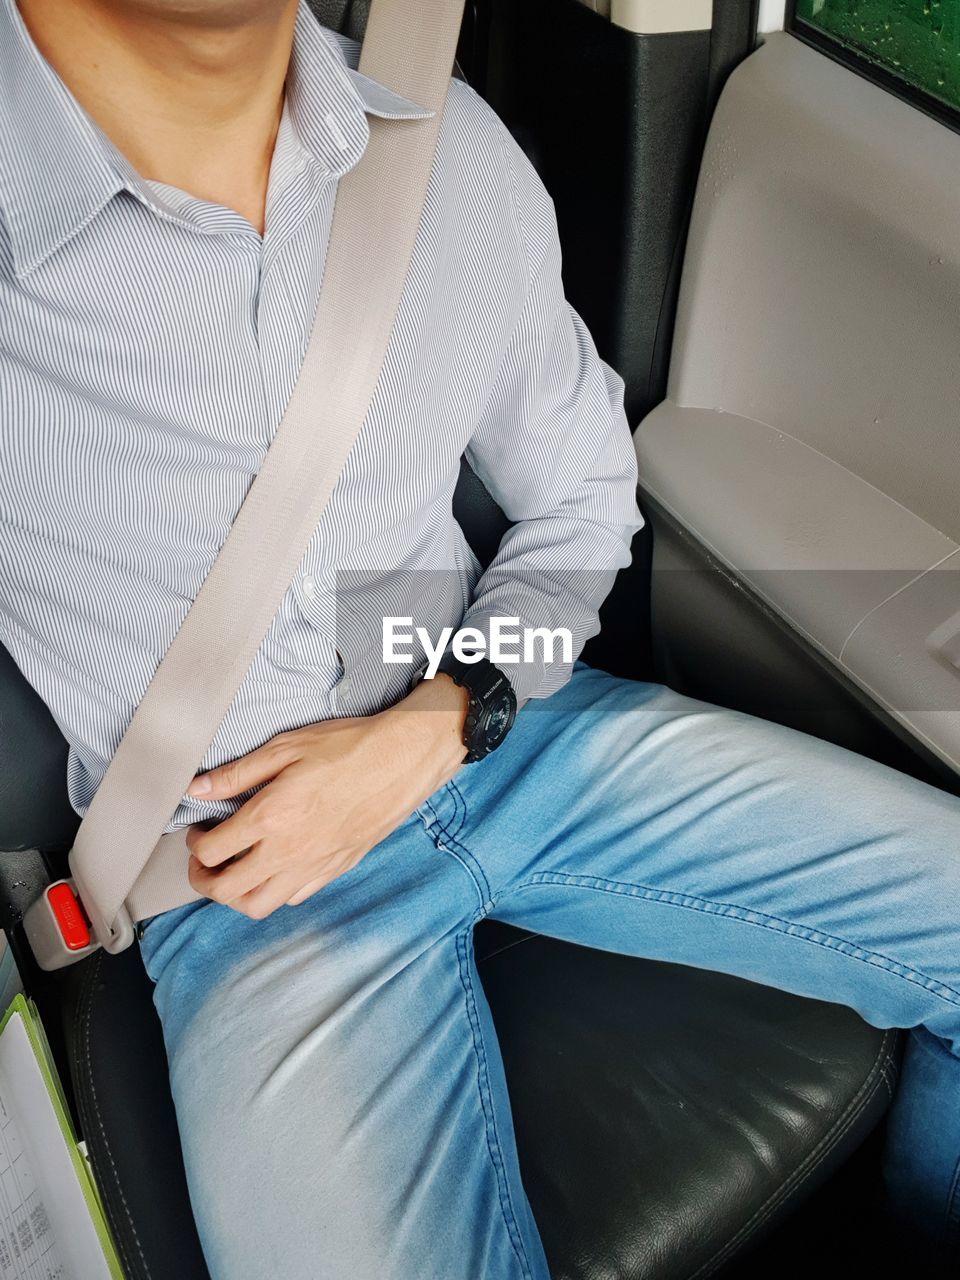 Midsection of man sitting on vehicle seat in car